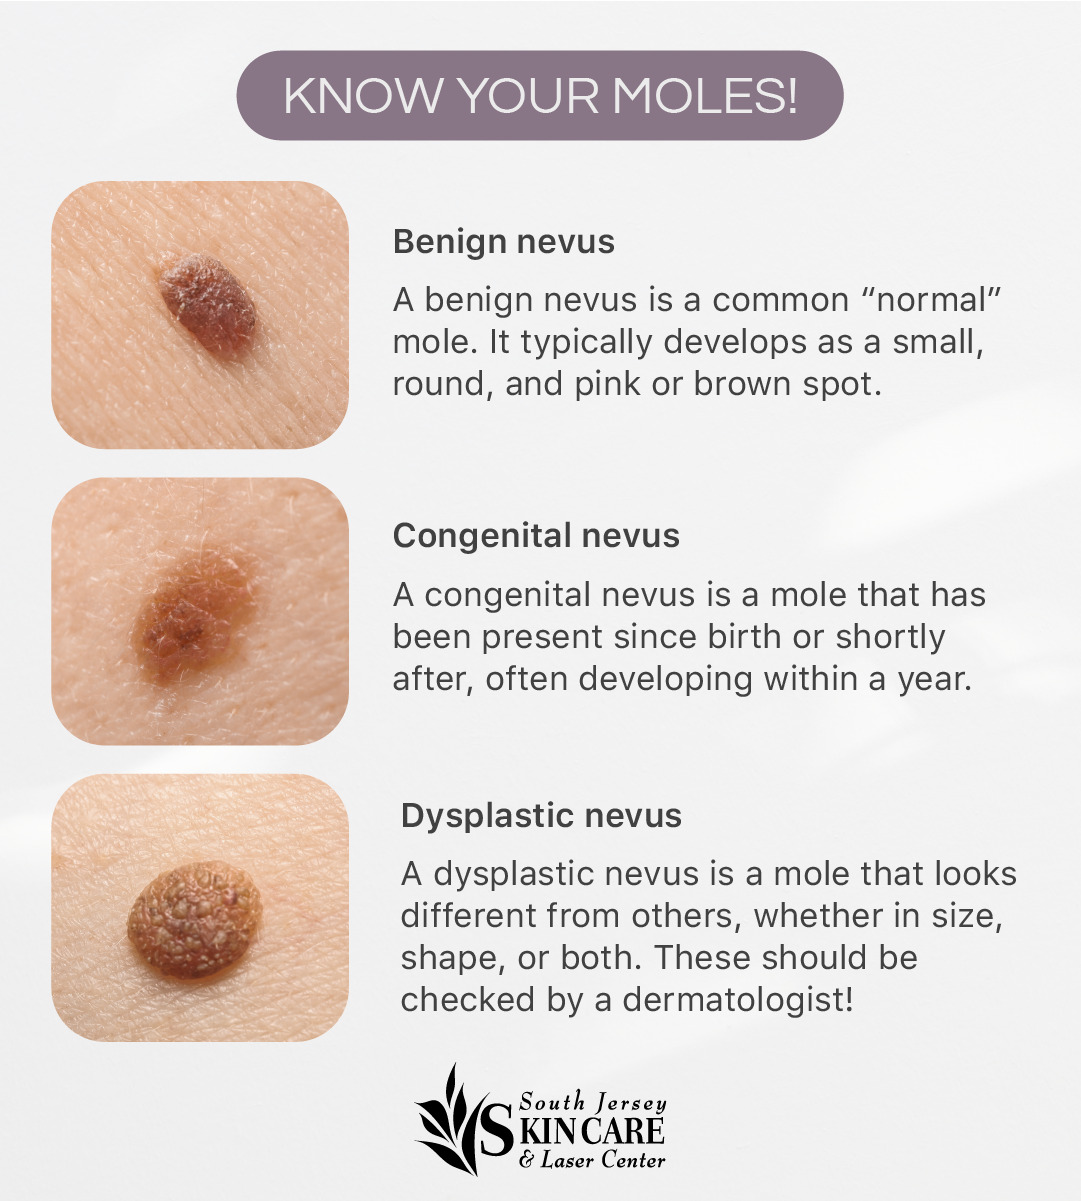 Get info on moles from New Jersey’s South Jersey Skin Care & Laser Center.